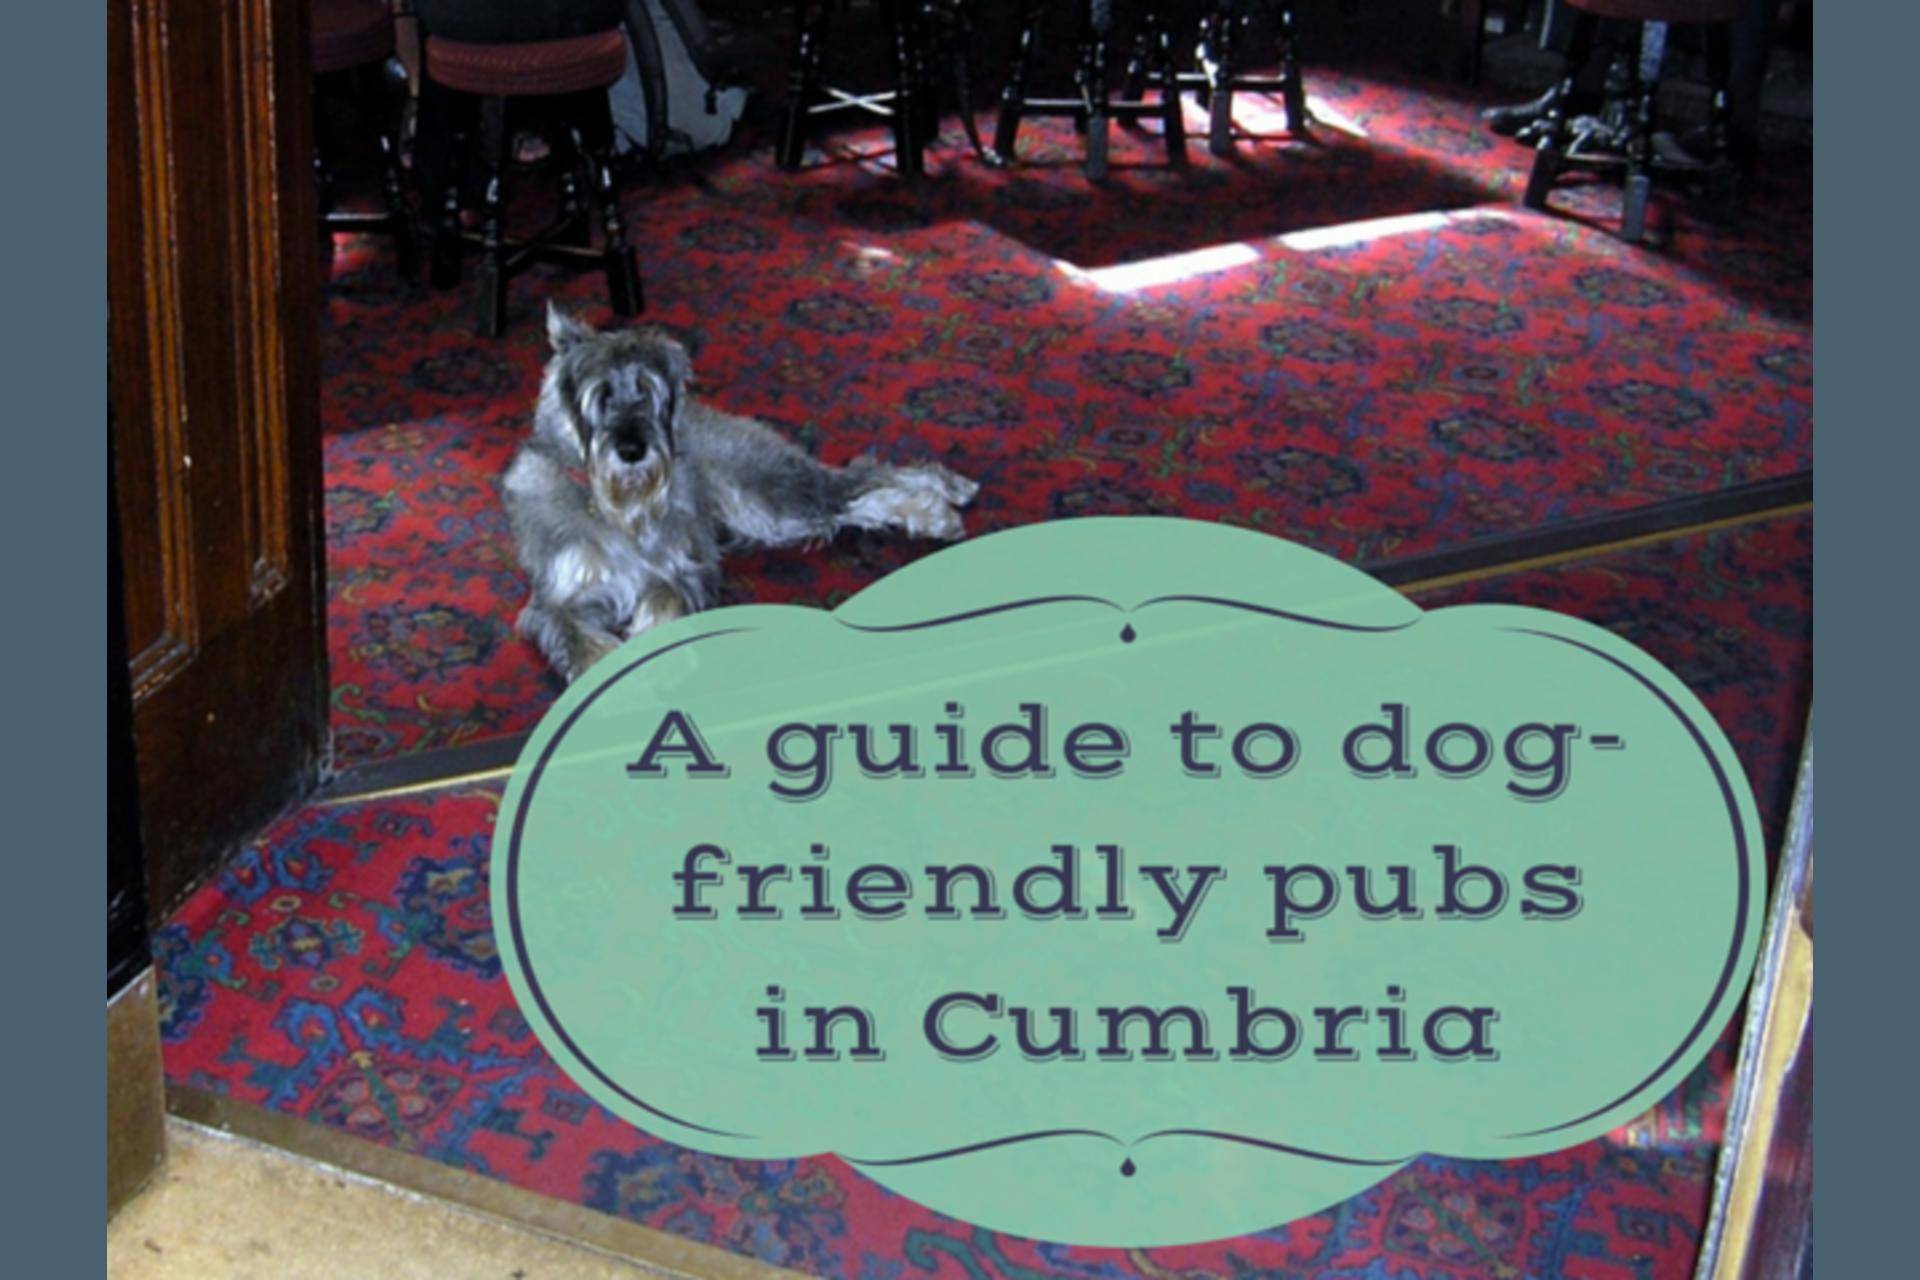 Dog-friendly pubs in Cumbria | Heart of the Lakes Guide